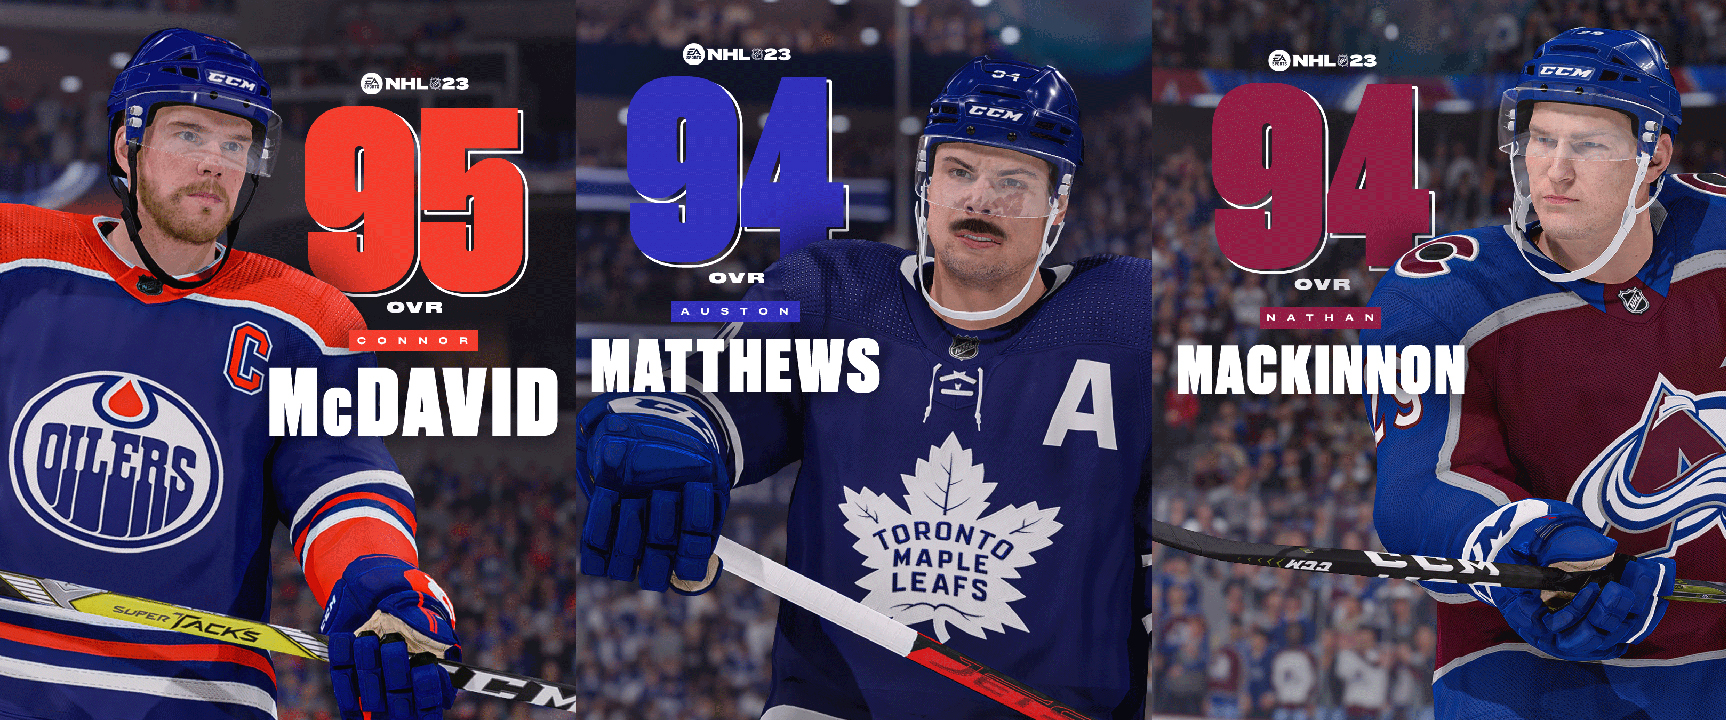 NHL 23 Player Ratings - Top 50 Players Revealed